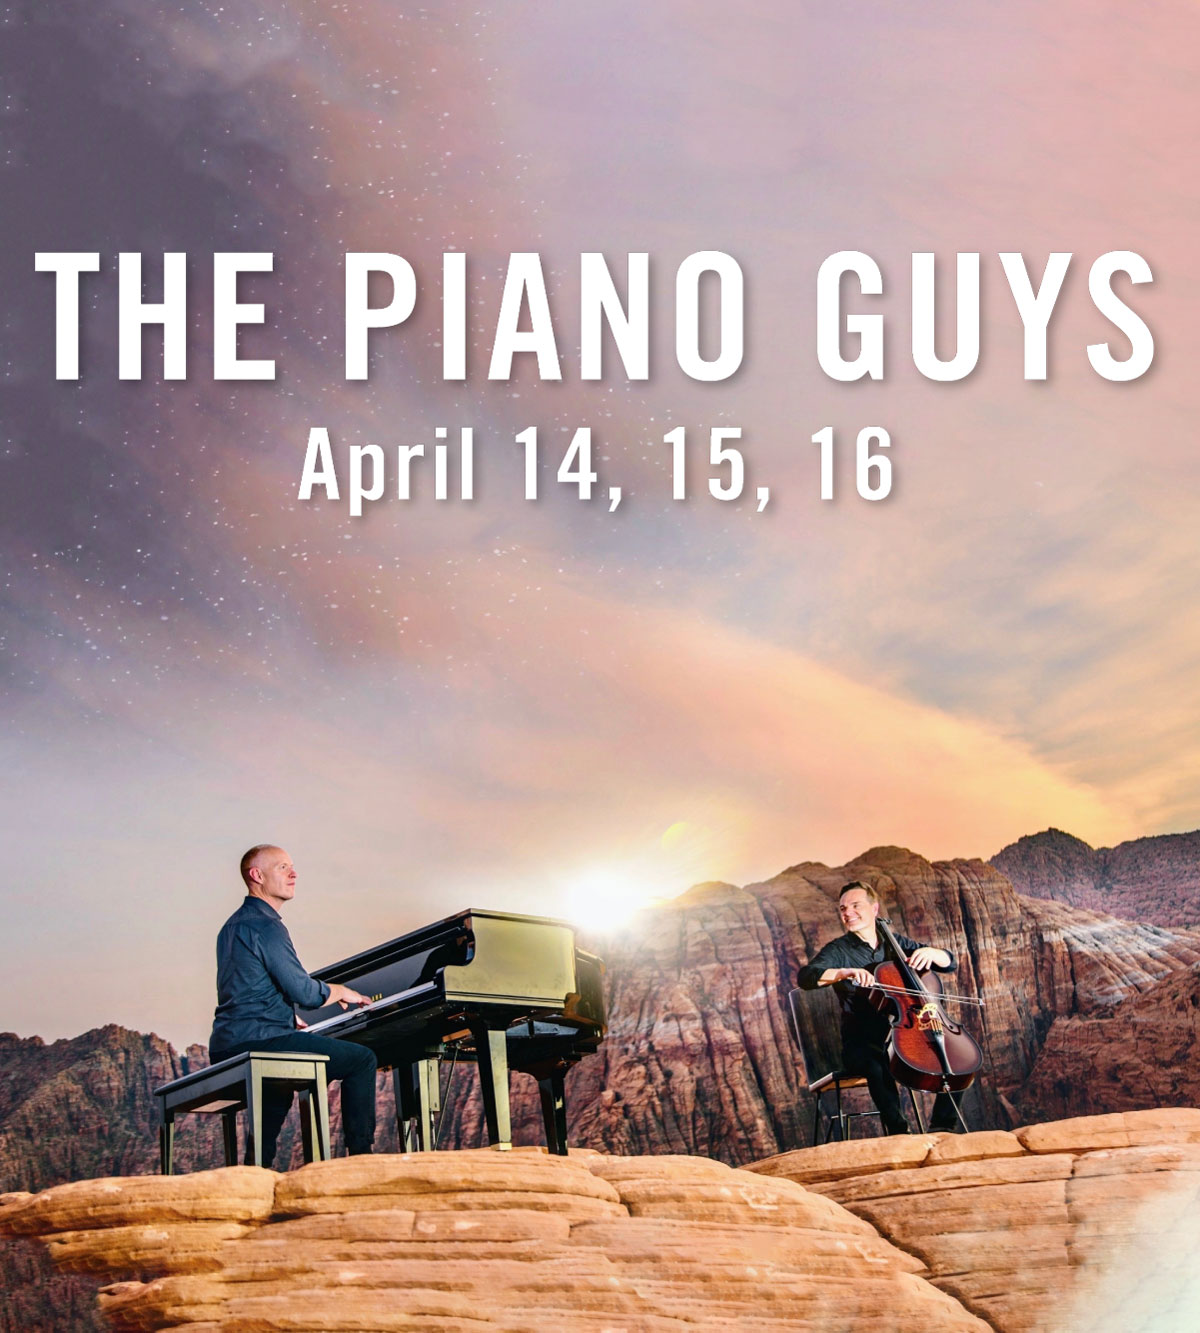 the Piano Guys April 14, 15, 16